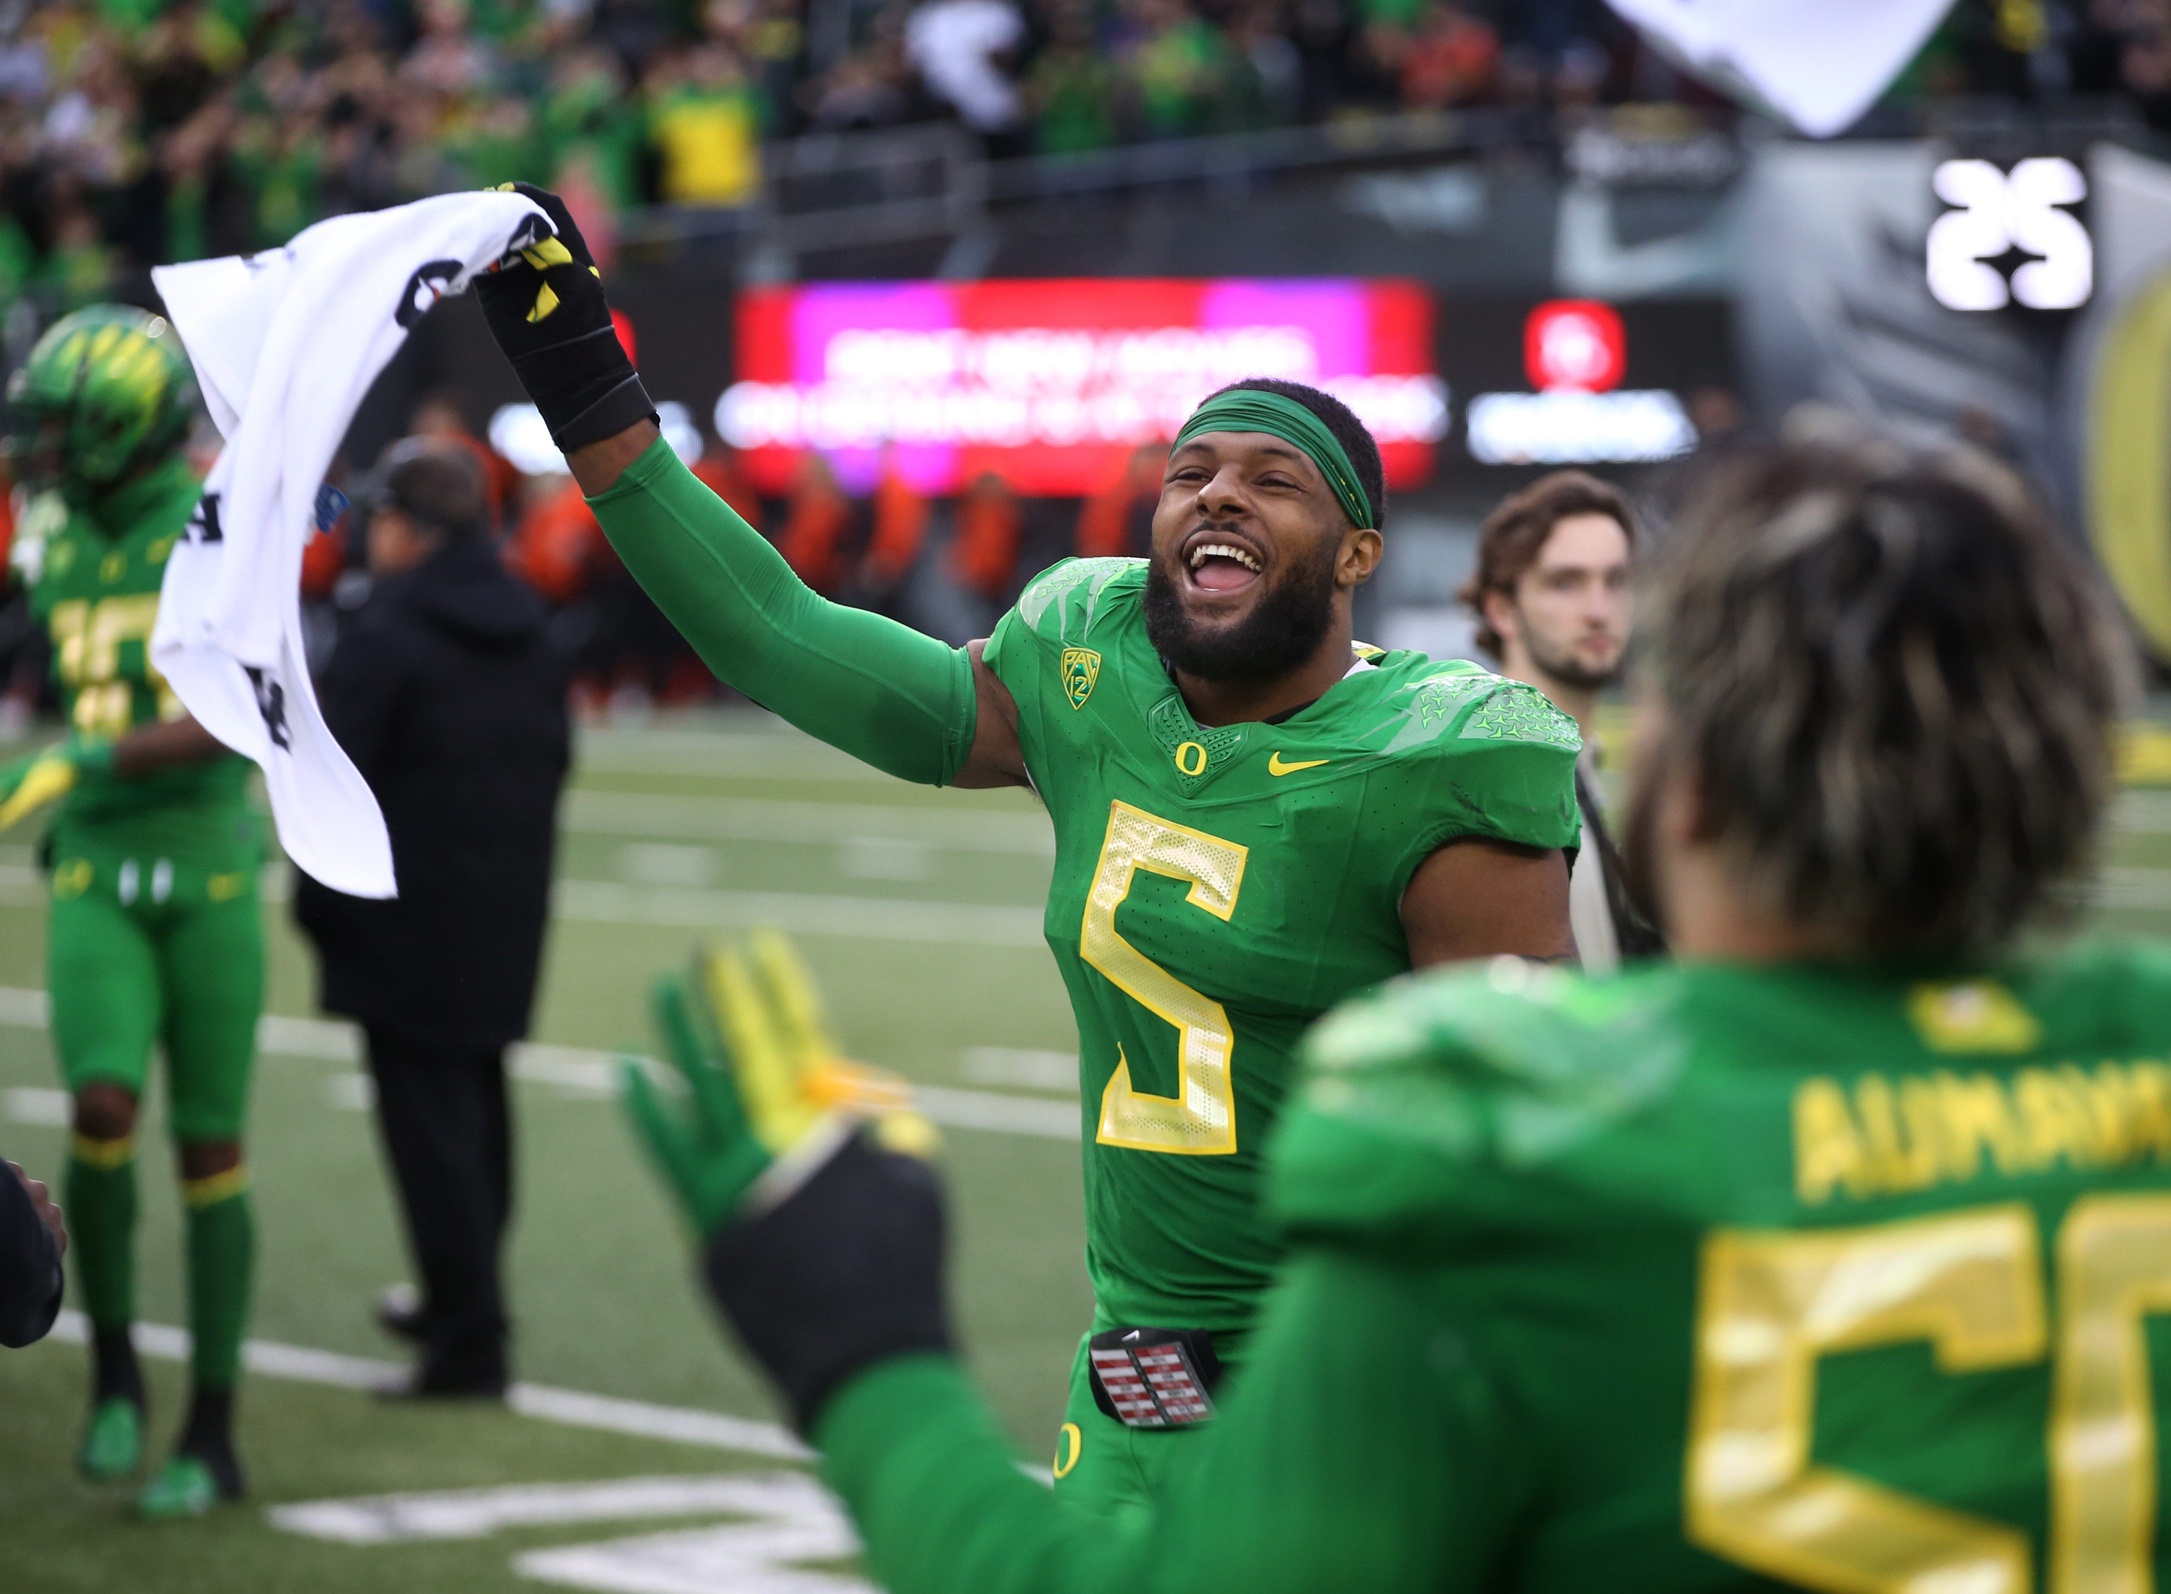 New York Giants Defensive End Kayvon Thibodeaux to Wear No. 5 in Rookie NFL  Season - Sports Illustrated Oregon Ducks News, Analysis and More